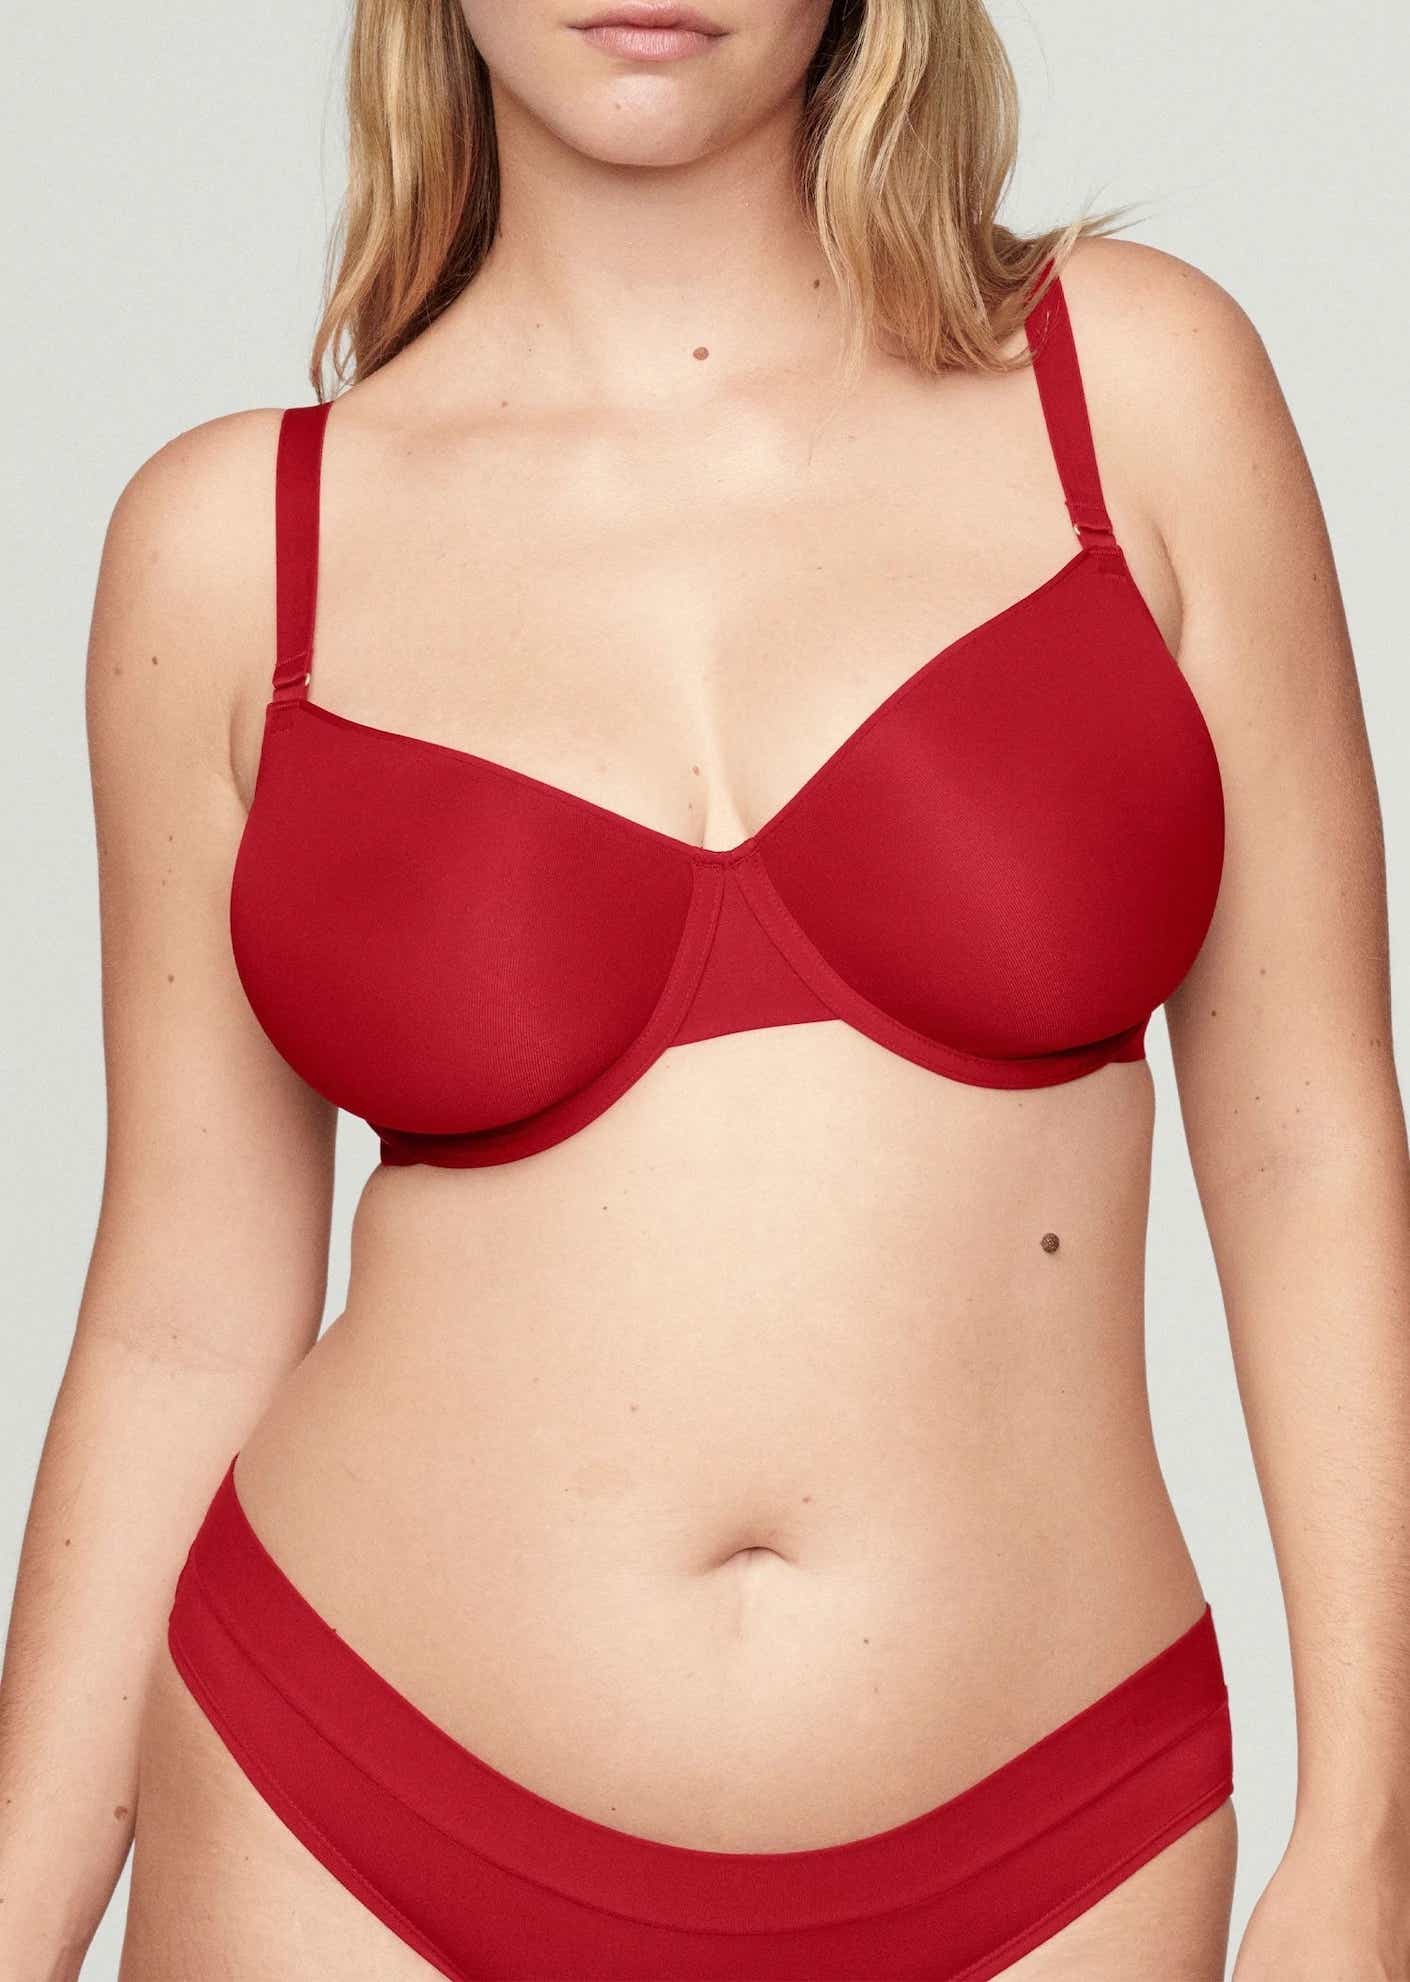 woman in red bra and underwear Cuup